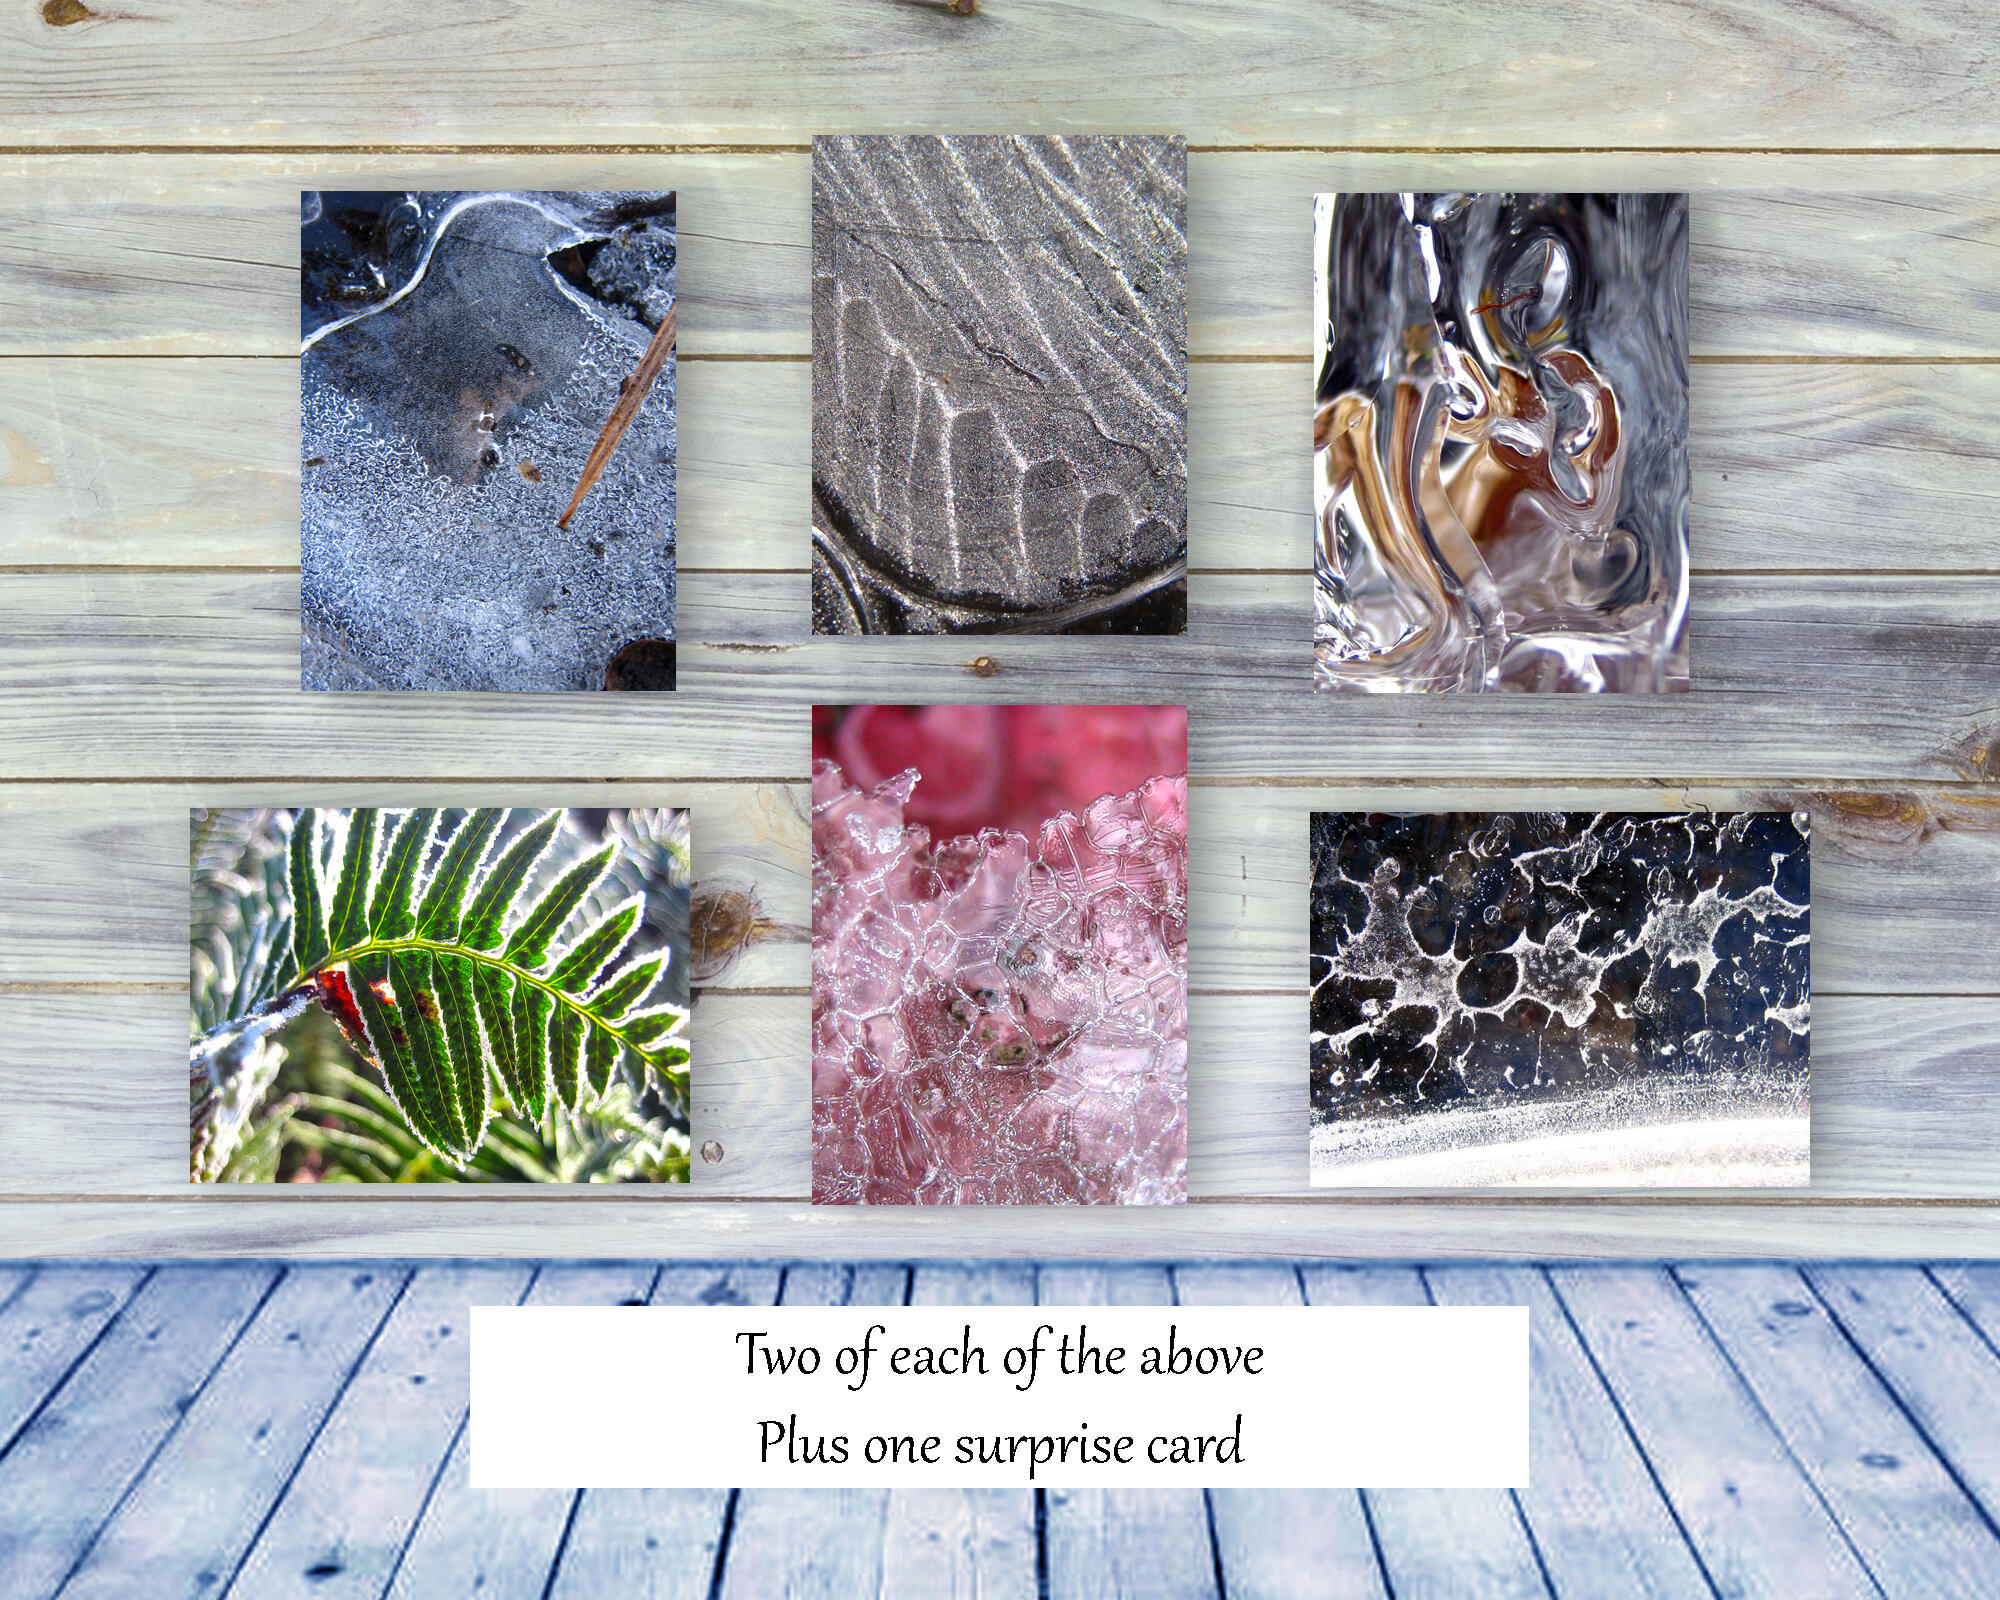 Snow and Ice I - greeting card collection by The Poetry of Nature, Stories in nature photo cards with poems. Boxed Set Baker's Dozen